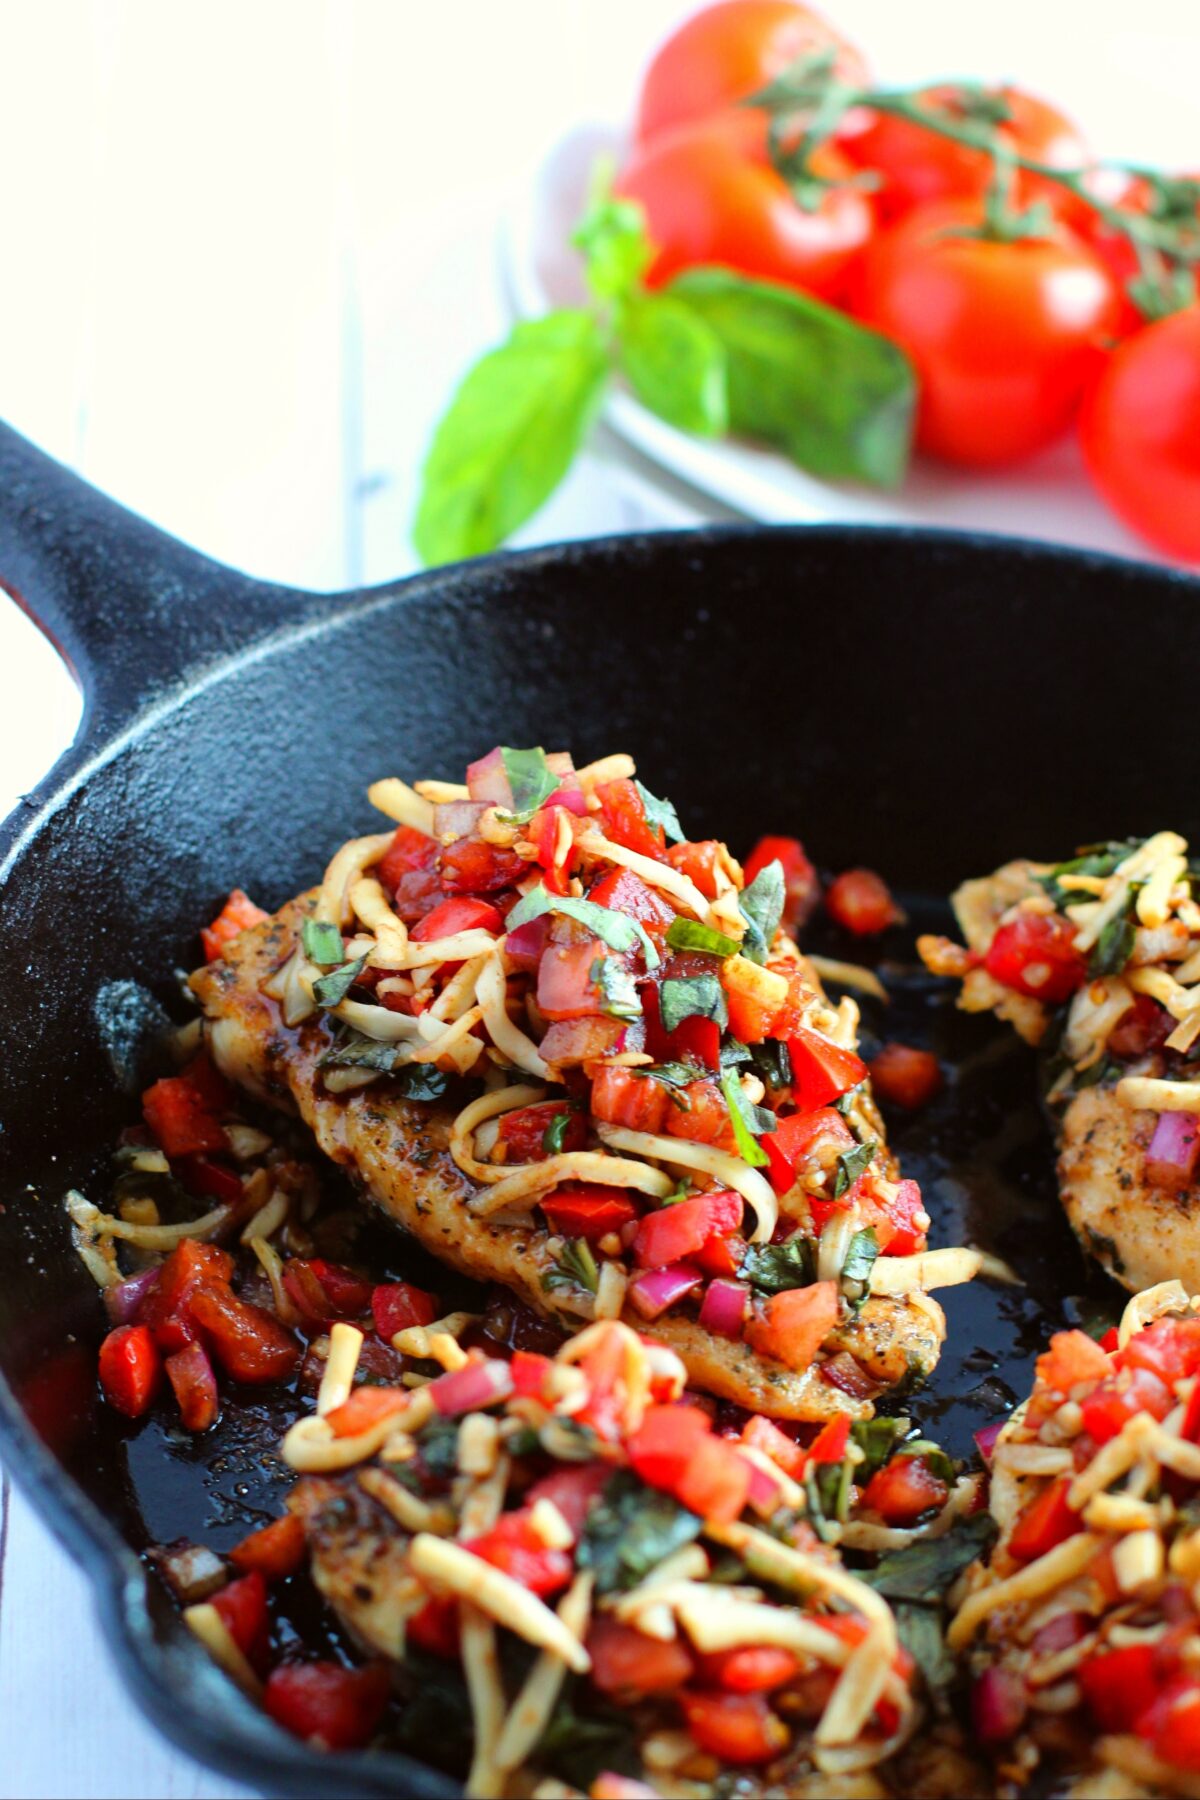 A delicious, easy to make chicken dish that is perfect for a quick weeknight meal. This skillet bruschetta chicken will be a family favorite!